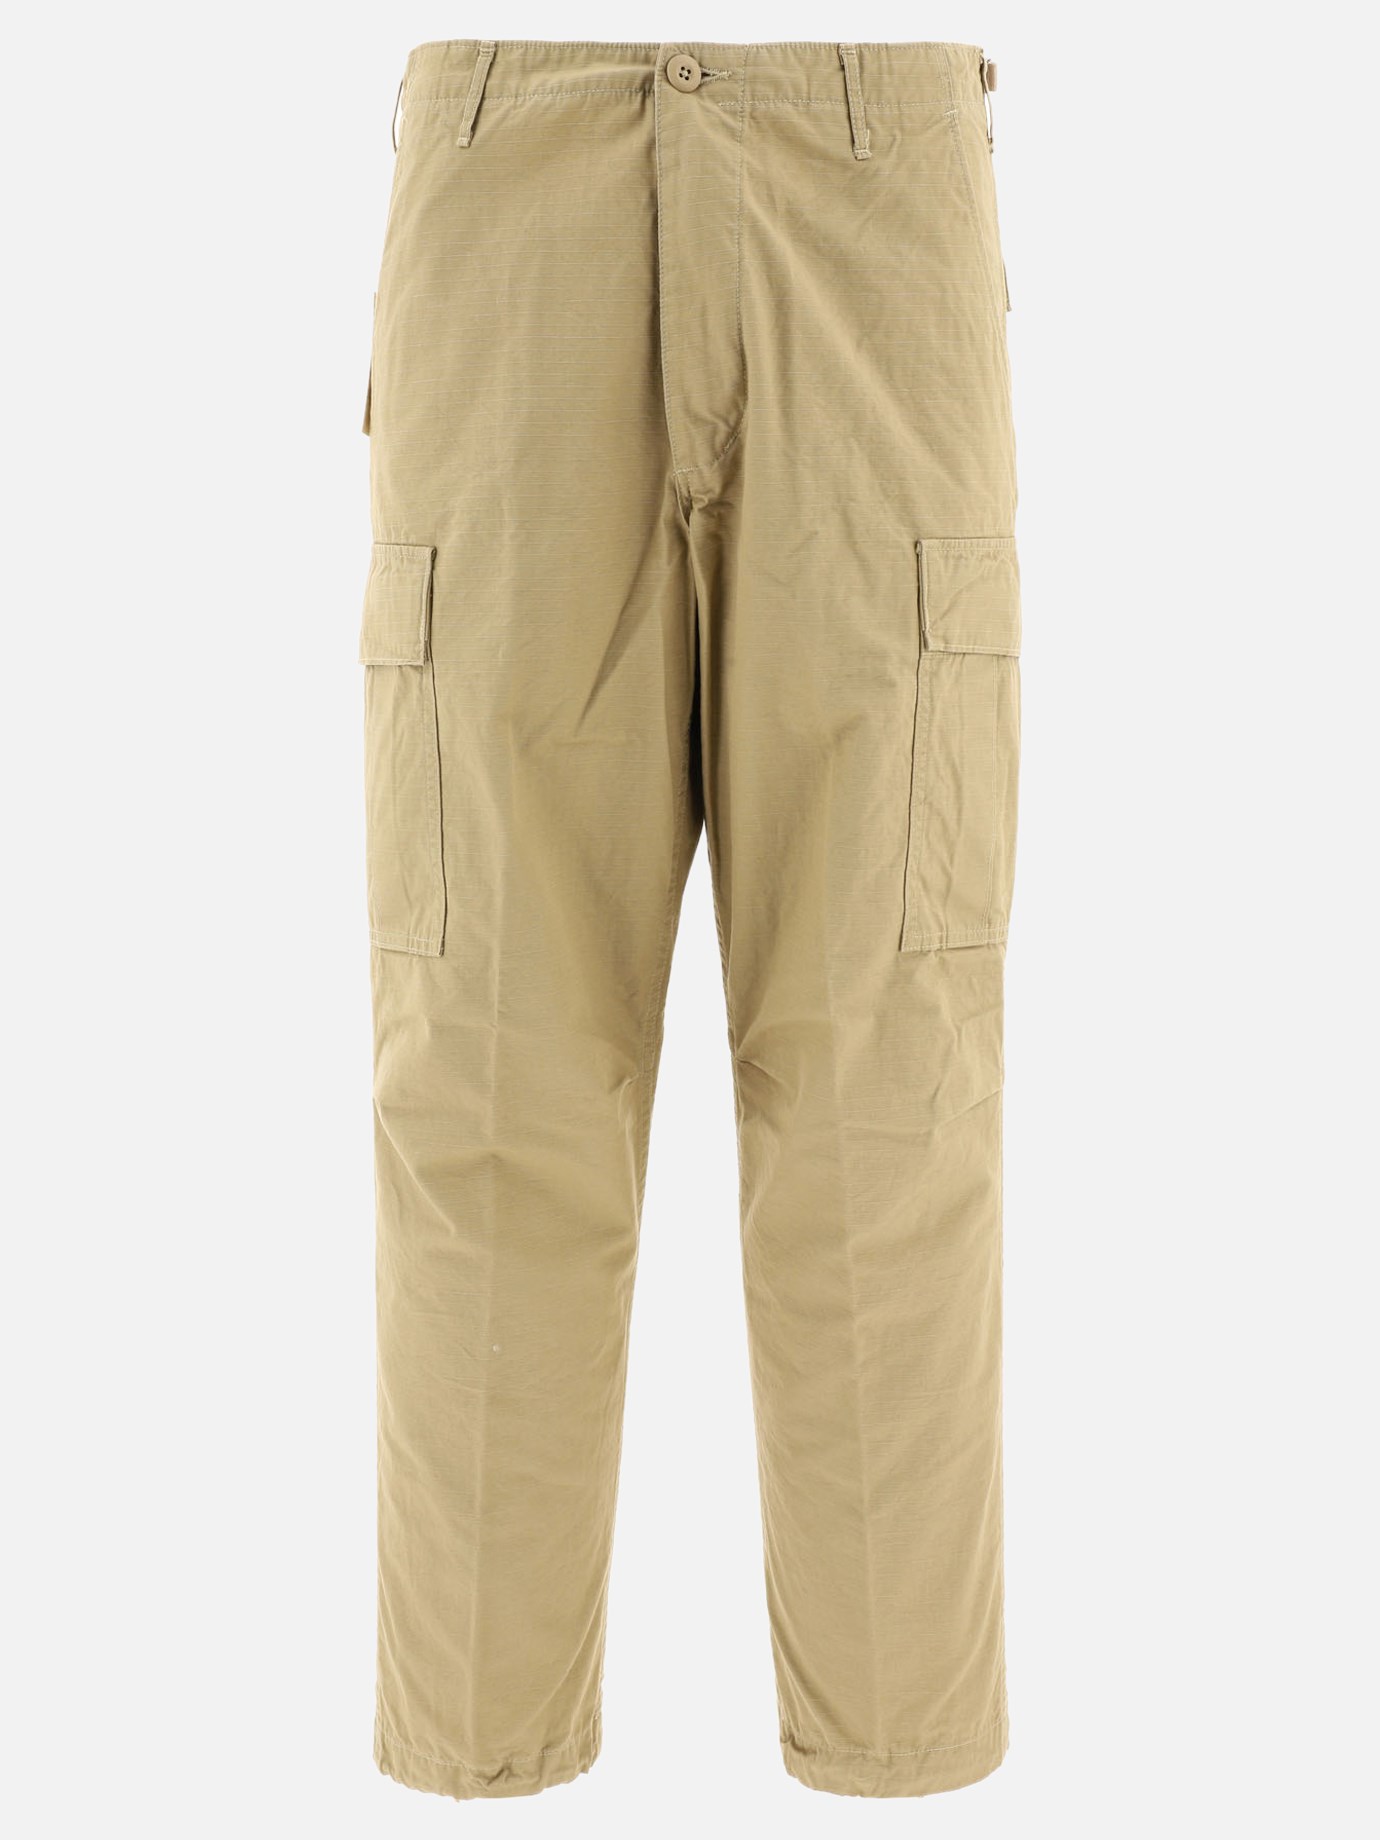  Ripstop  cargo pantsby OrSlow - 1